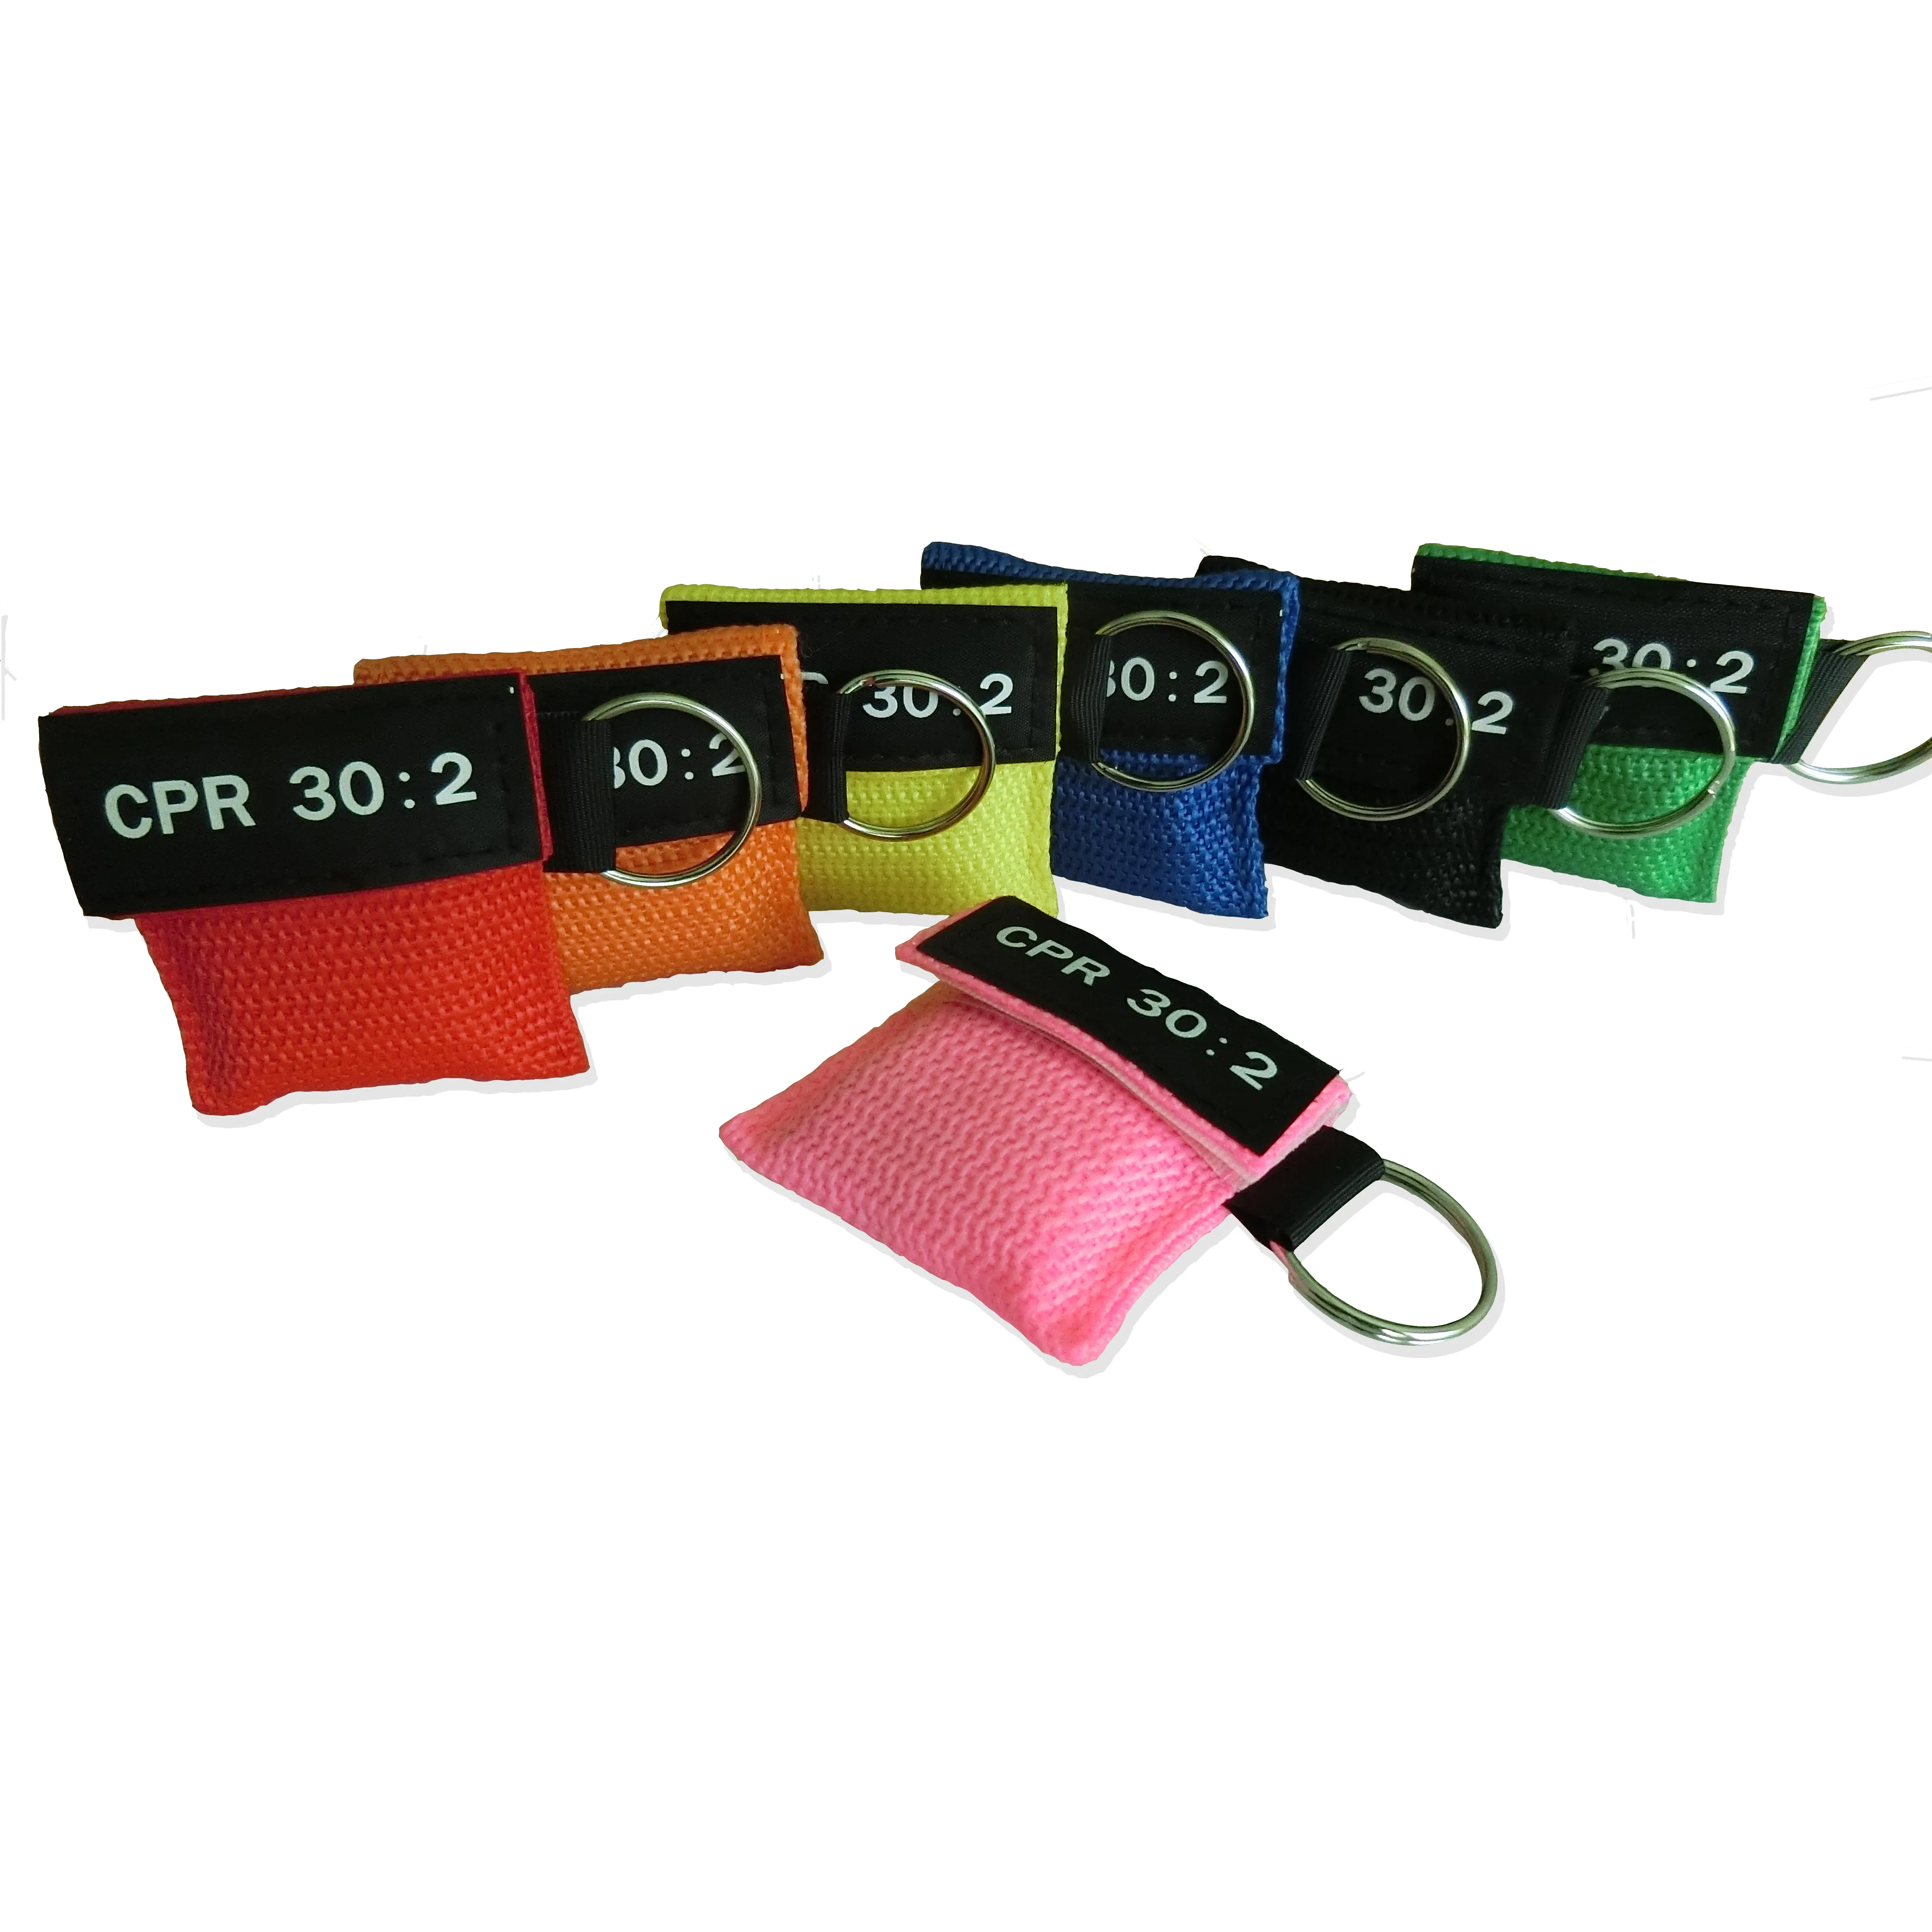 Emergency Survive Tool 30:2 CPR Resuscitator Mask With Pocket Keychain First-aid Skill Training Face Shield One-way Valve